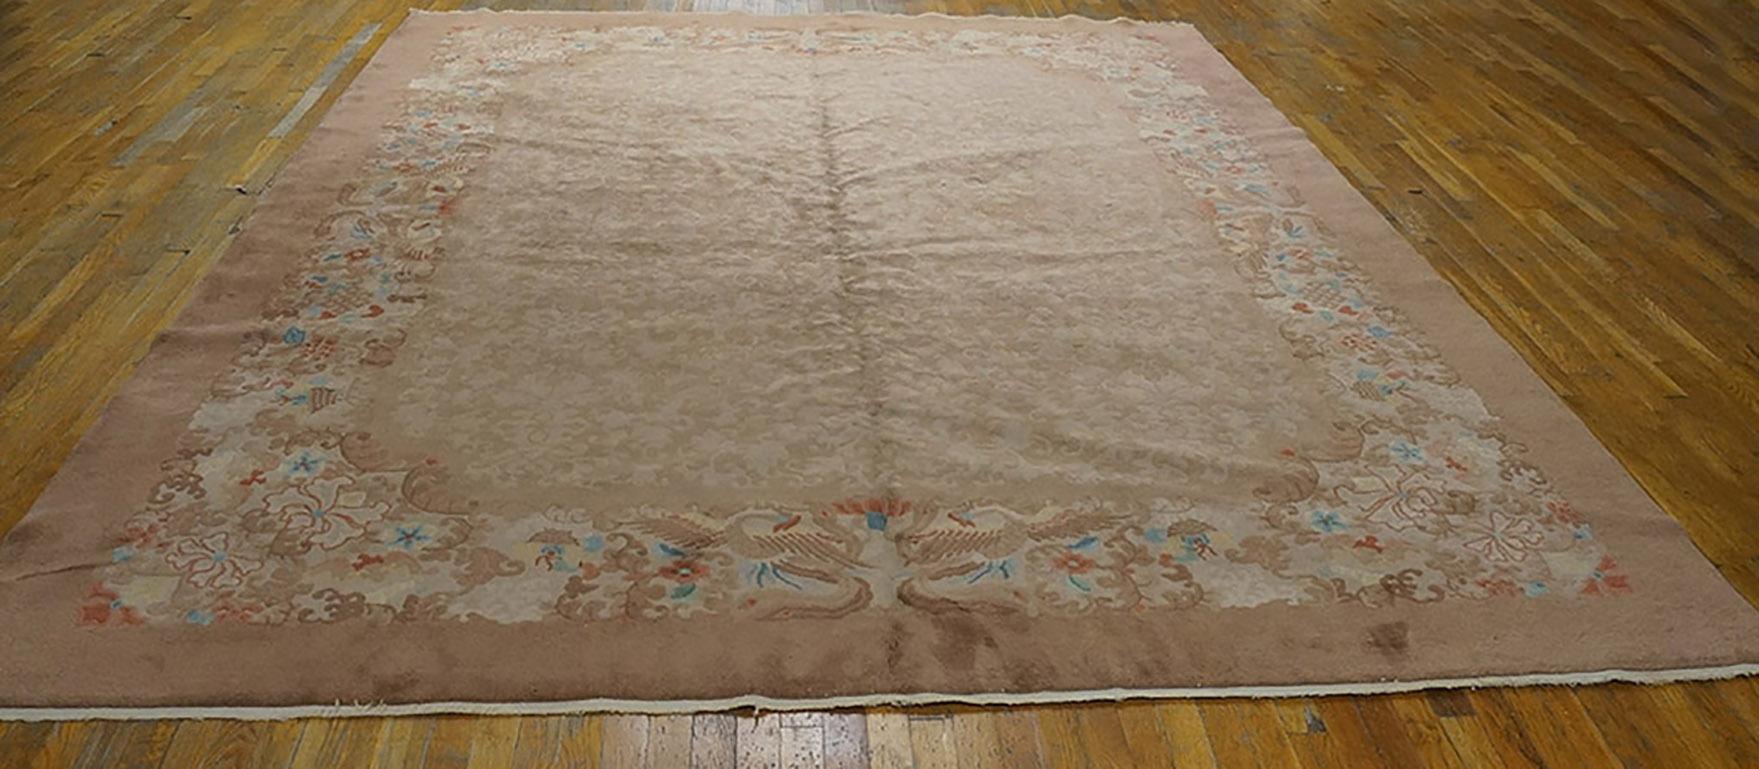 Hand-Knotted 1920s  Chinese Art Deco Carpet ( 9' x 11'10